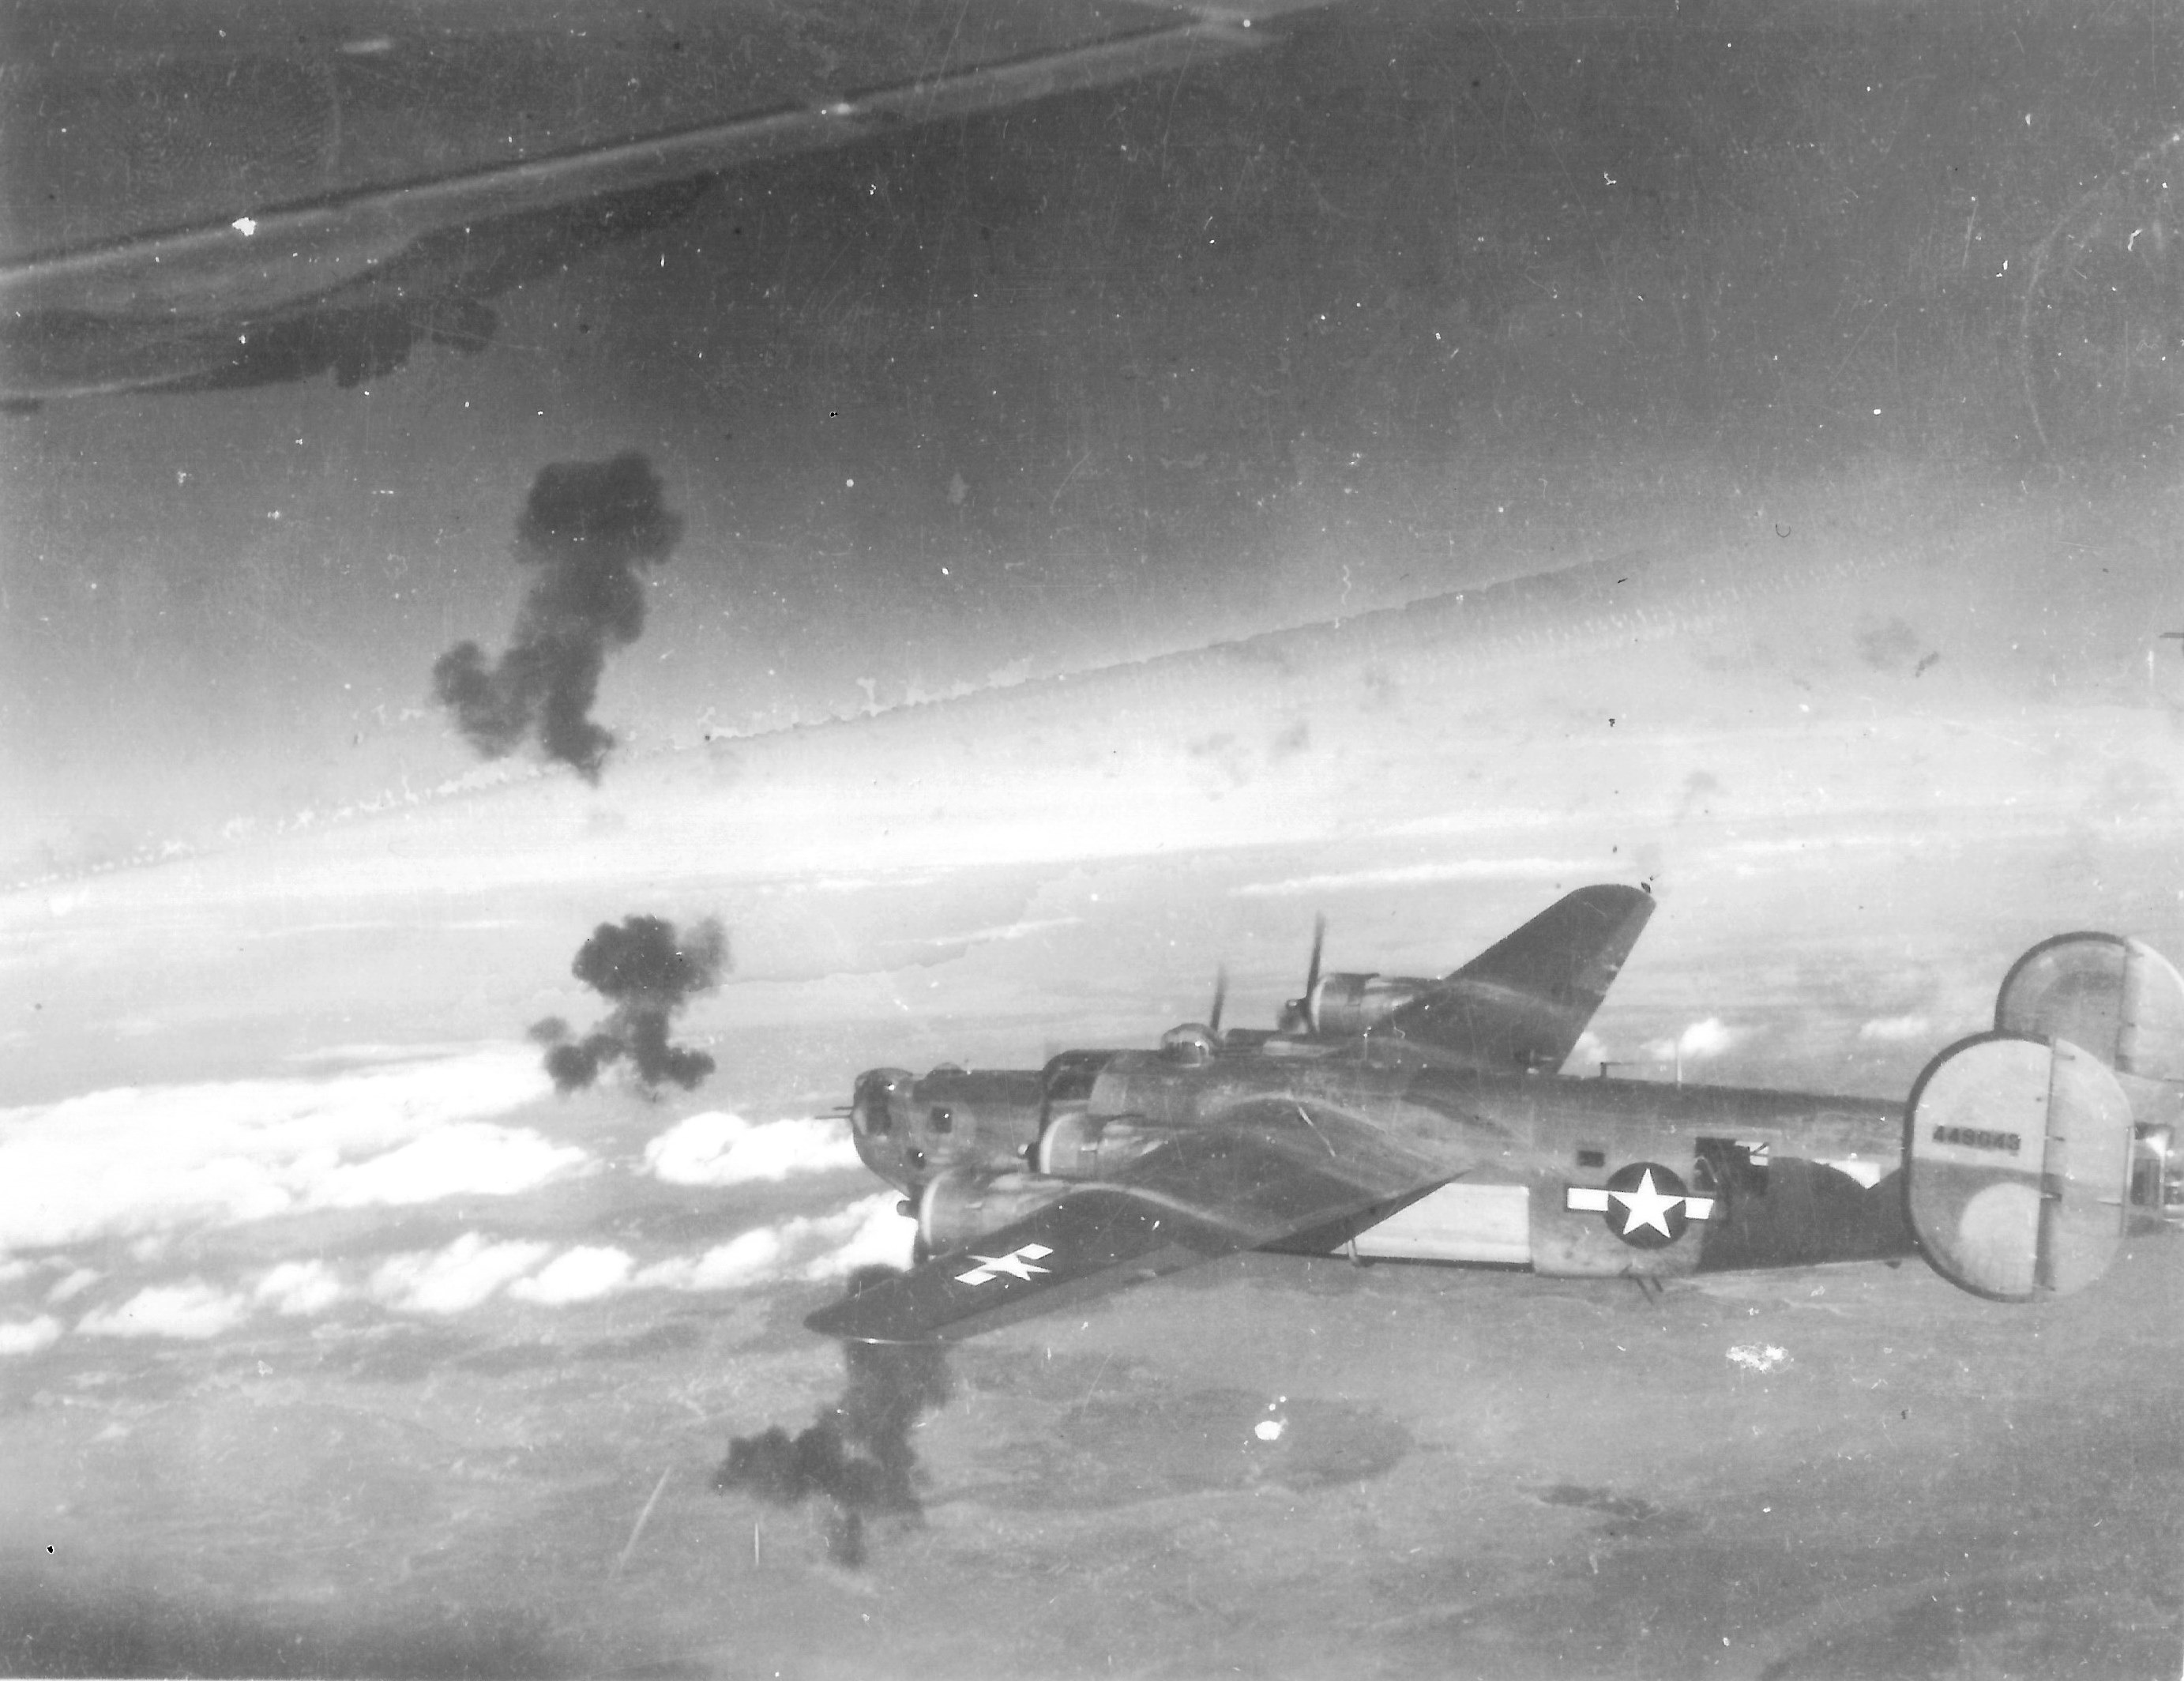 B-24L Liberator “Short Stuff” with the 727th Bomb Squadron flying through flak on its bomb run over their target between Dec 1944 and Feb 1945. Note the open bomb bay doors.